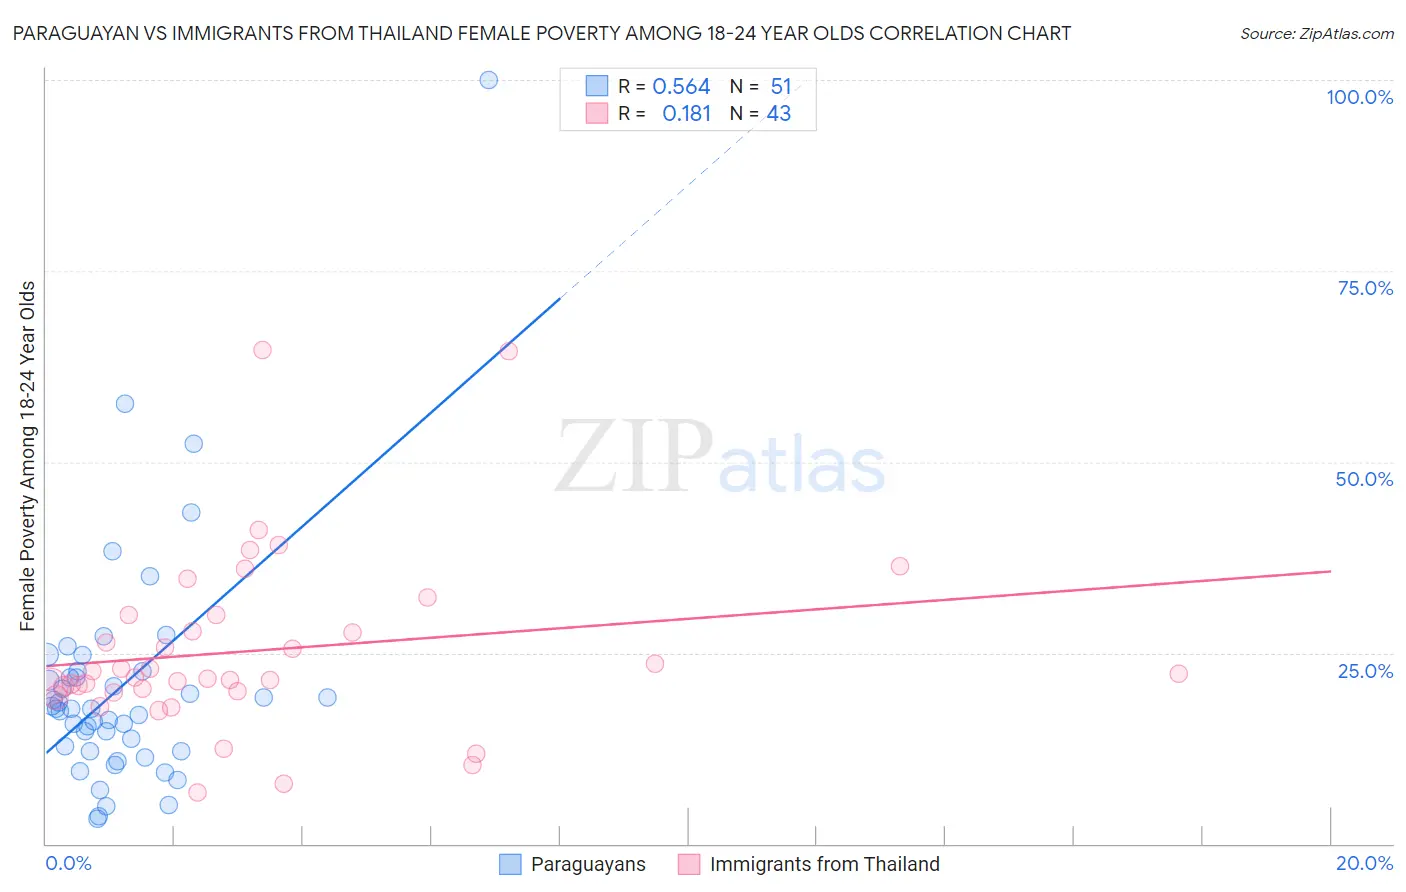 Paraguayan vs Immigrants from Thailand Female Poverty Among 18-24 Year Olds